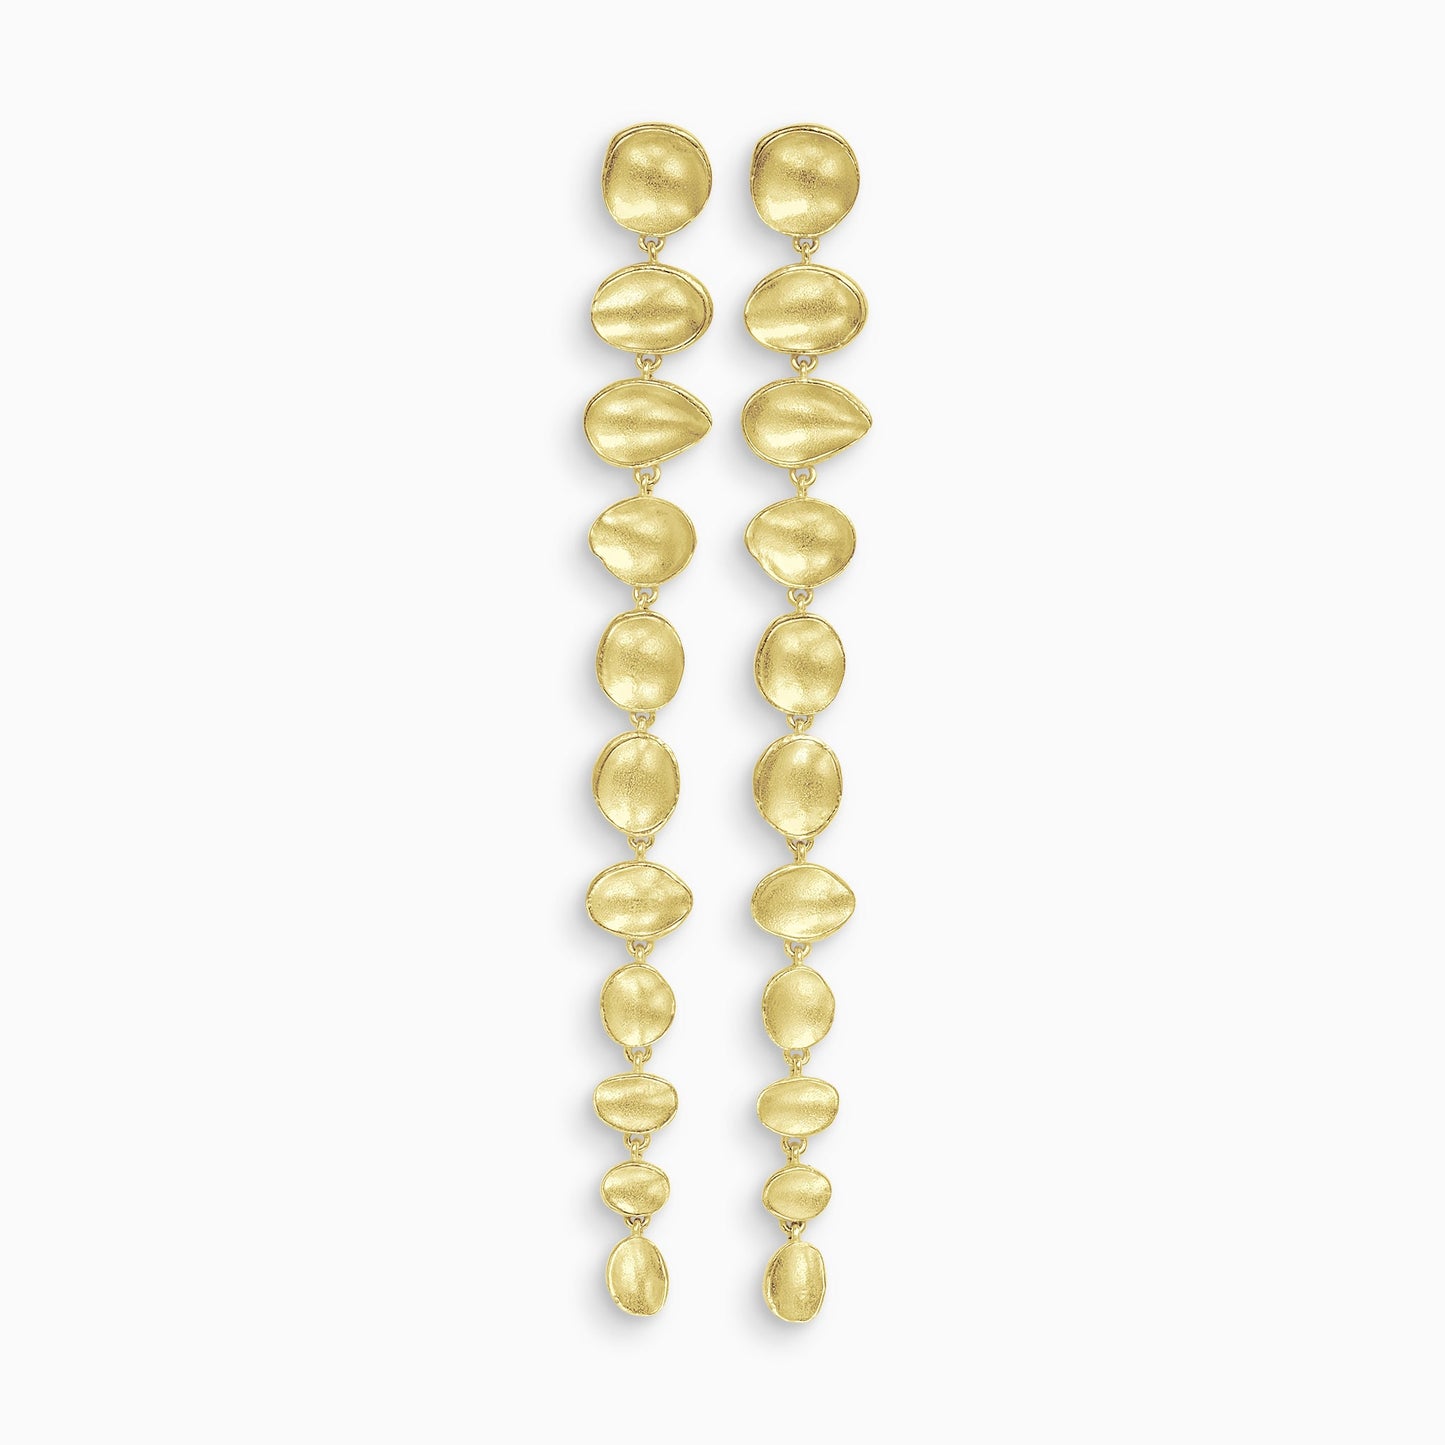 A pair of 18ct Fairtrade yellow gold drop earrings. A line of 11 articulating concave discs of various organic shapes and sizes with a stud ear fastening on the top disc. Satin finish. 105mm length, 10mm width.